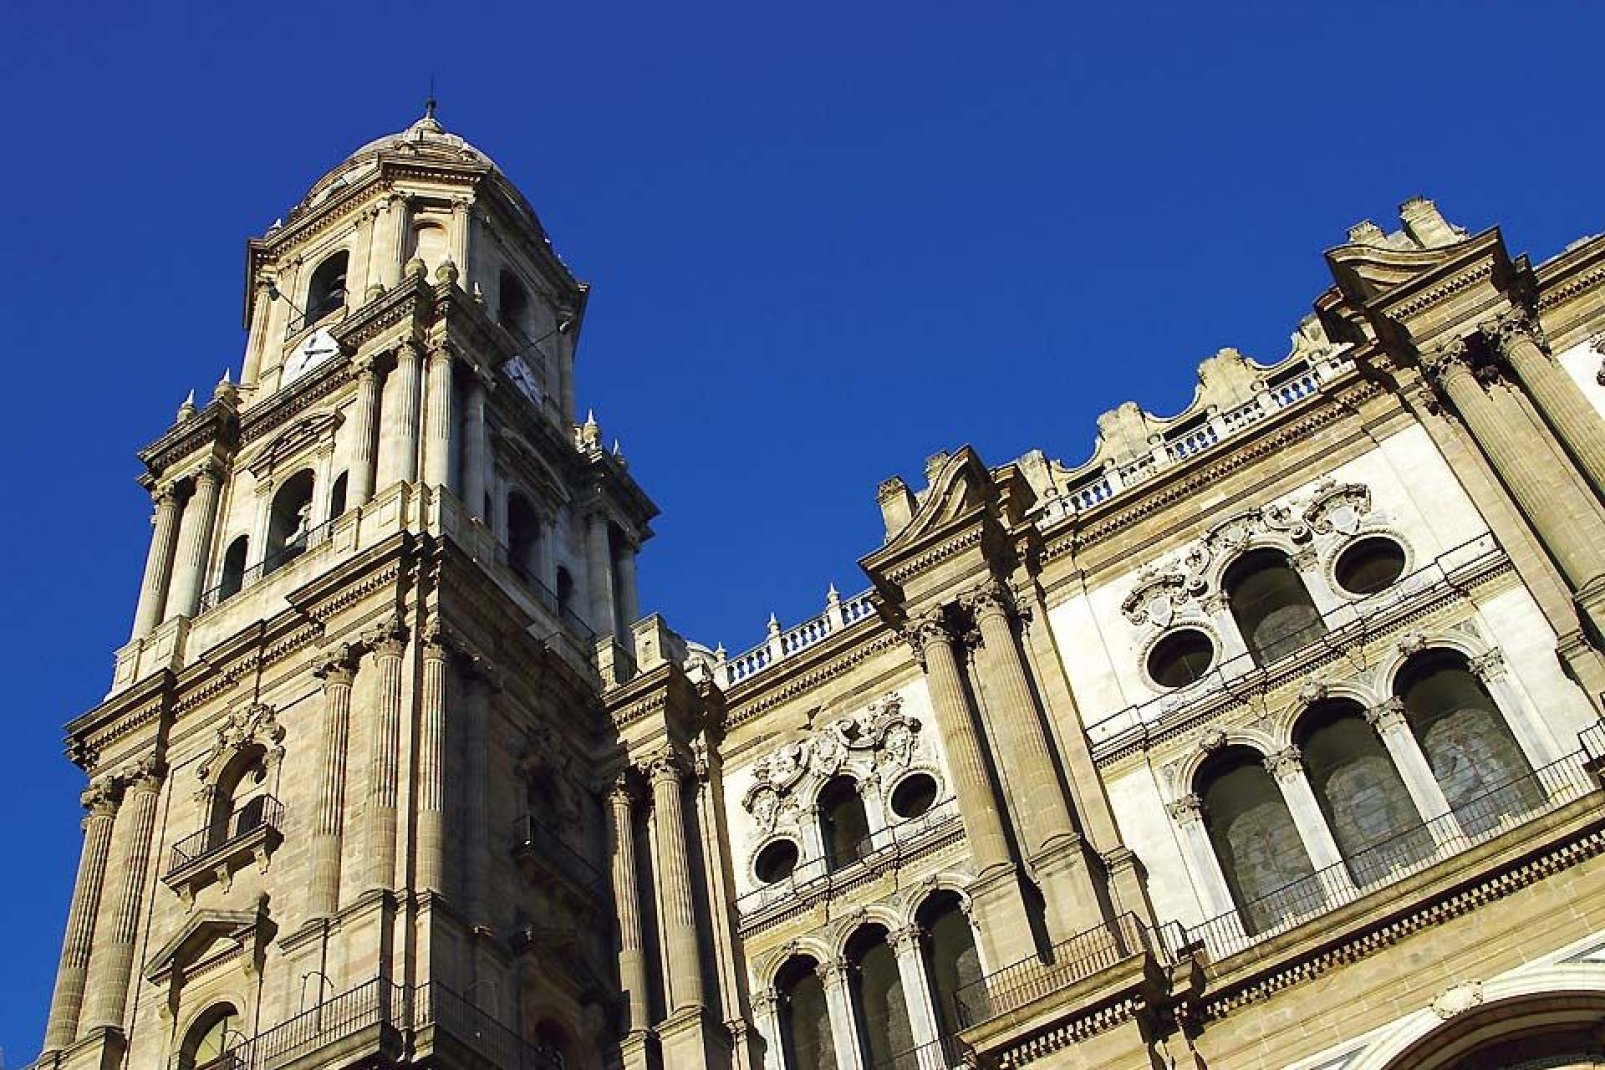 Located in the city centre, it is one of the most beautiful Andalusian churches from the Renaissance period.